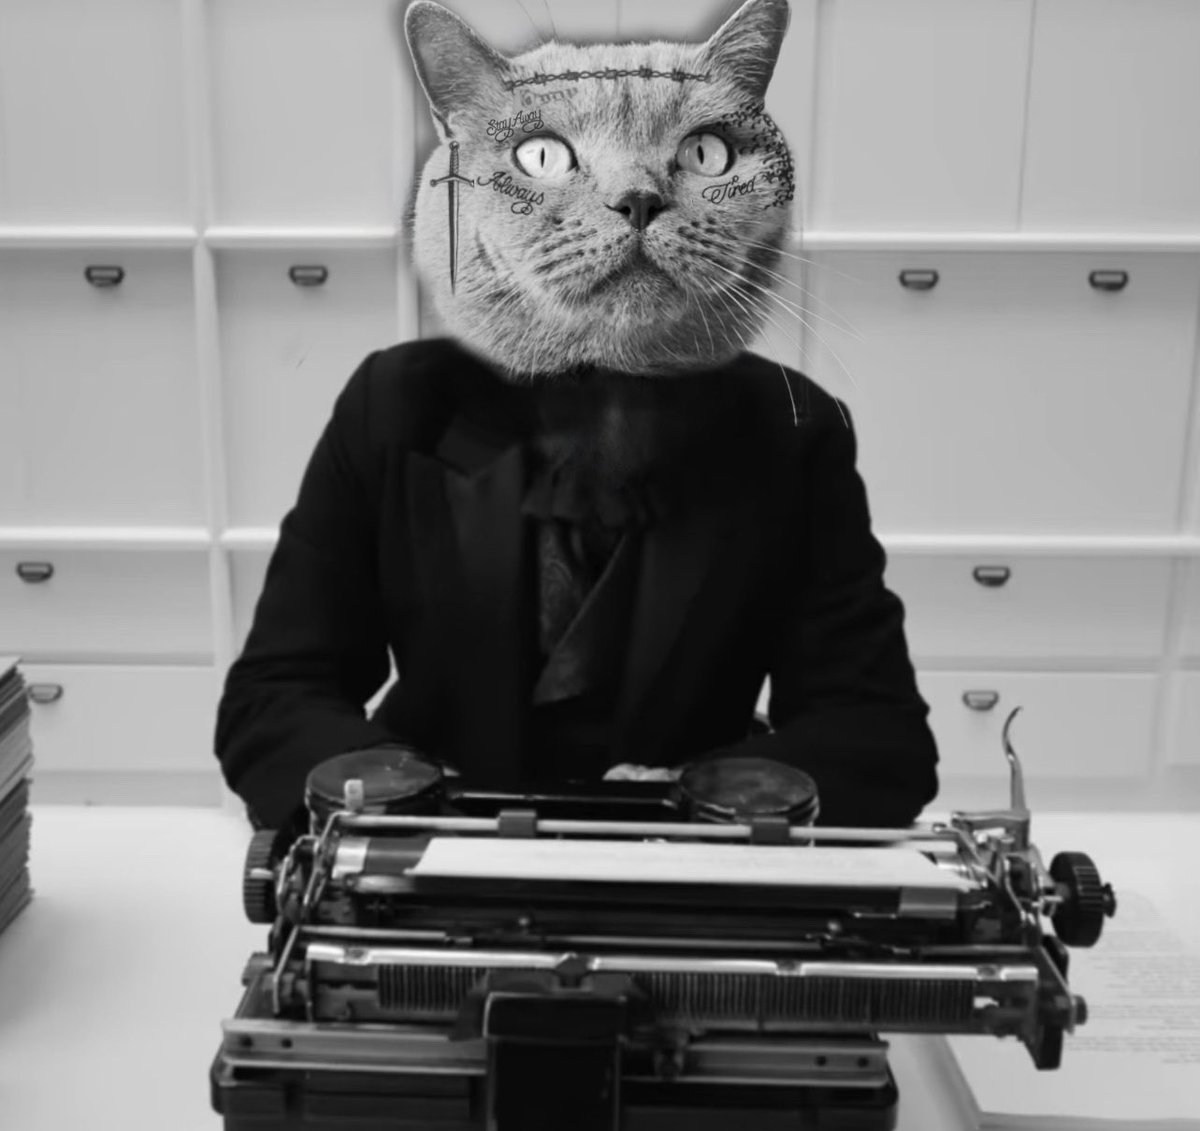 @taylornation13 i love you, it’s ruining meow life!!!!! 🐱 can we talk about the #FortnightVideo some more? #TSTTPD no keyboards involved just typewriters.